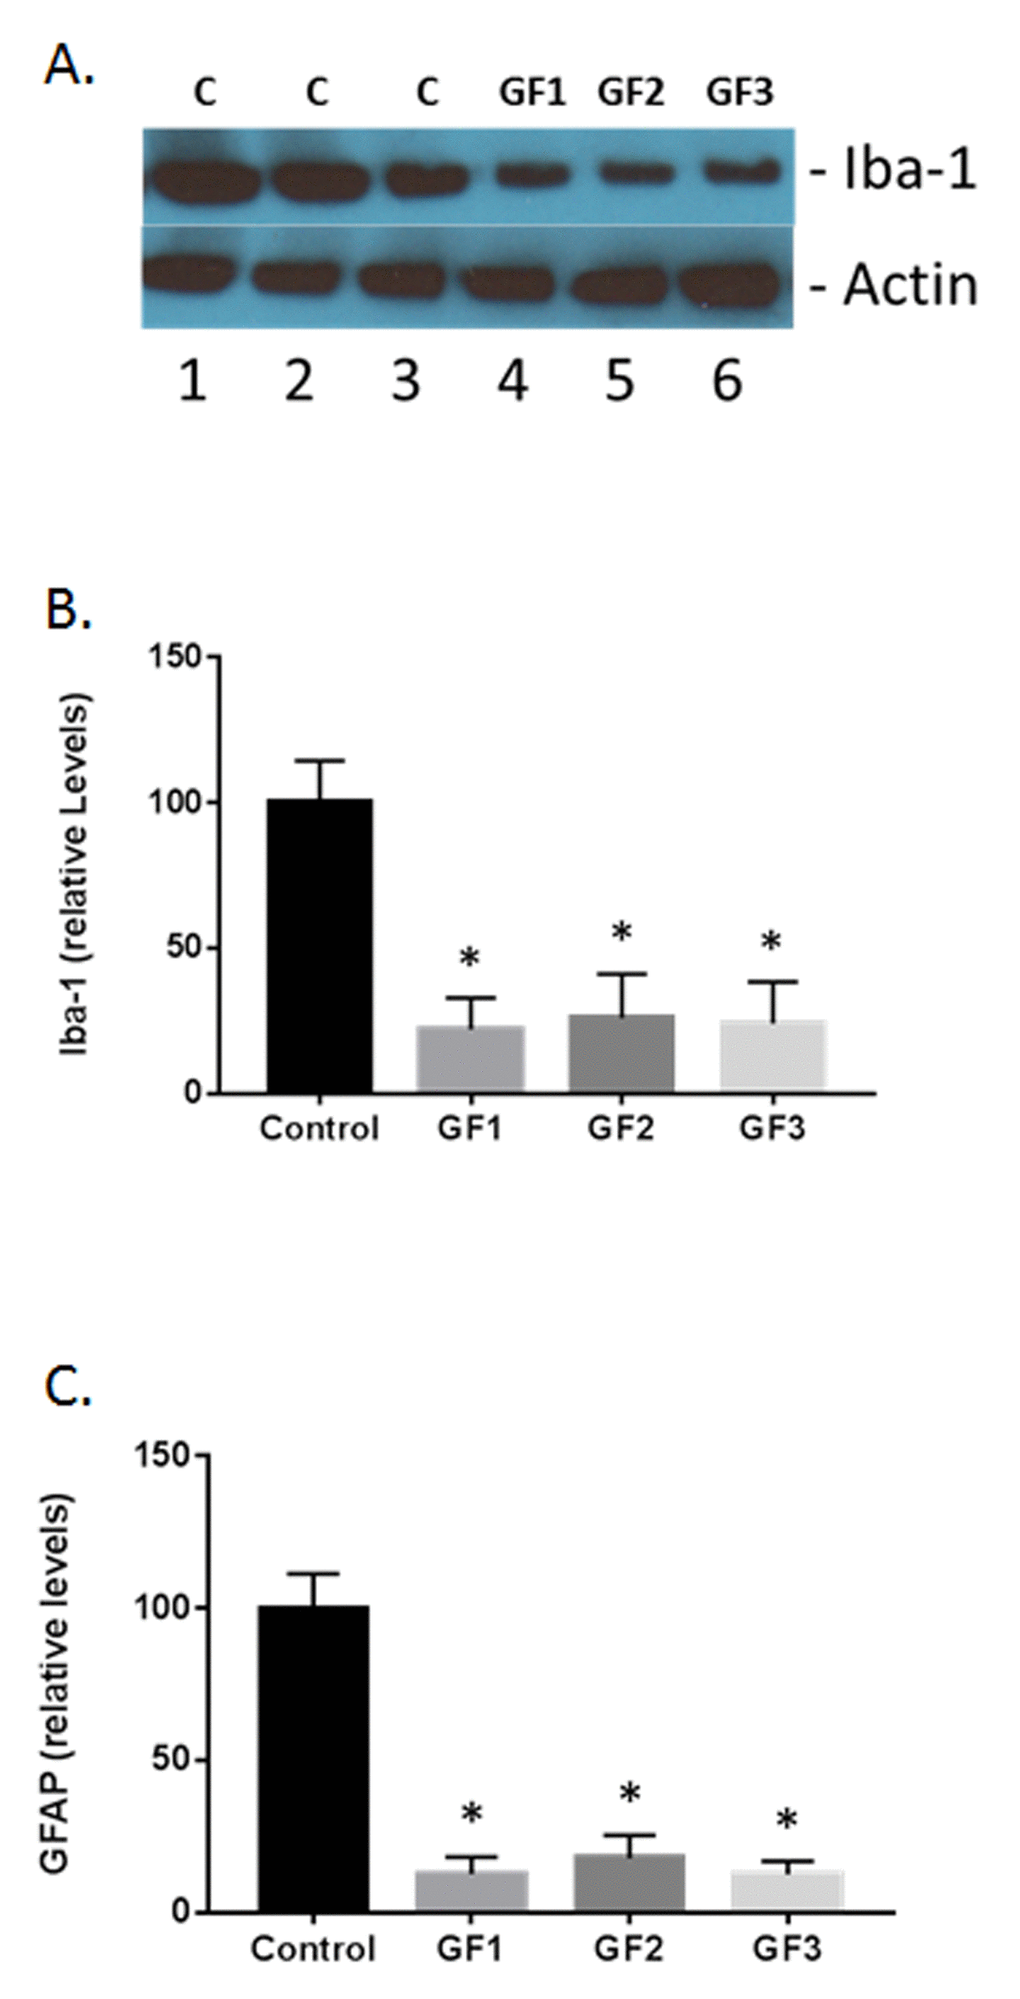 Measurement of glial activation in the aged brain and brains of animals fed GF diets. (A) Representative western blot of iba-1 levels in the brains of aged rats subjected to control or GF diets. C, control; GF1, GF2, GF3, GF diets. Actin is used as a control for loading. (B) Quantified levels of iba-1 in the brains of aged rats following feeding control diets or diets enriched with GF formulas. (C) Quantified levels of iba-1 in the brains of aged rats following feeding control diets or diets enriched with GF formulas. N = 20 per group. P